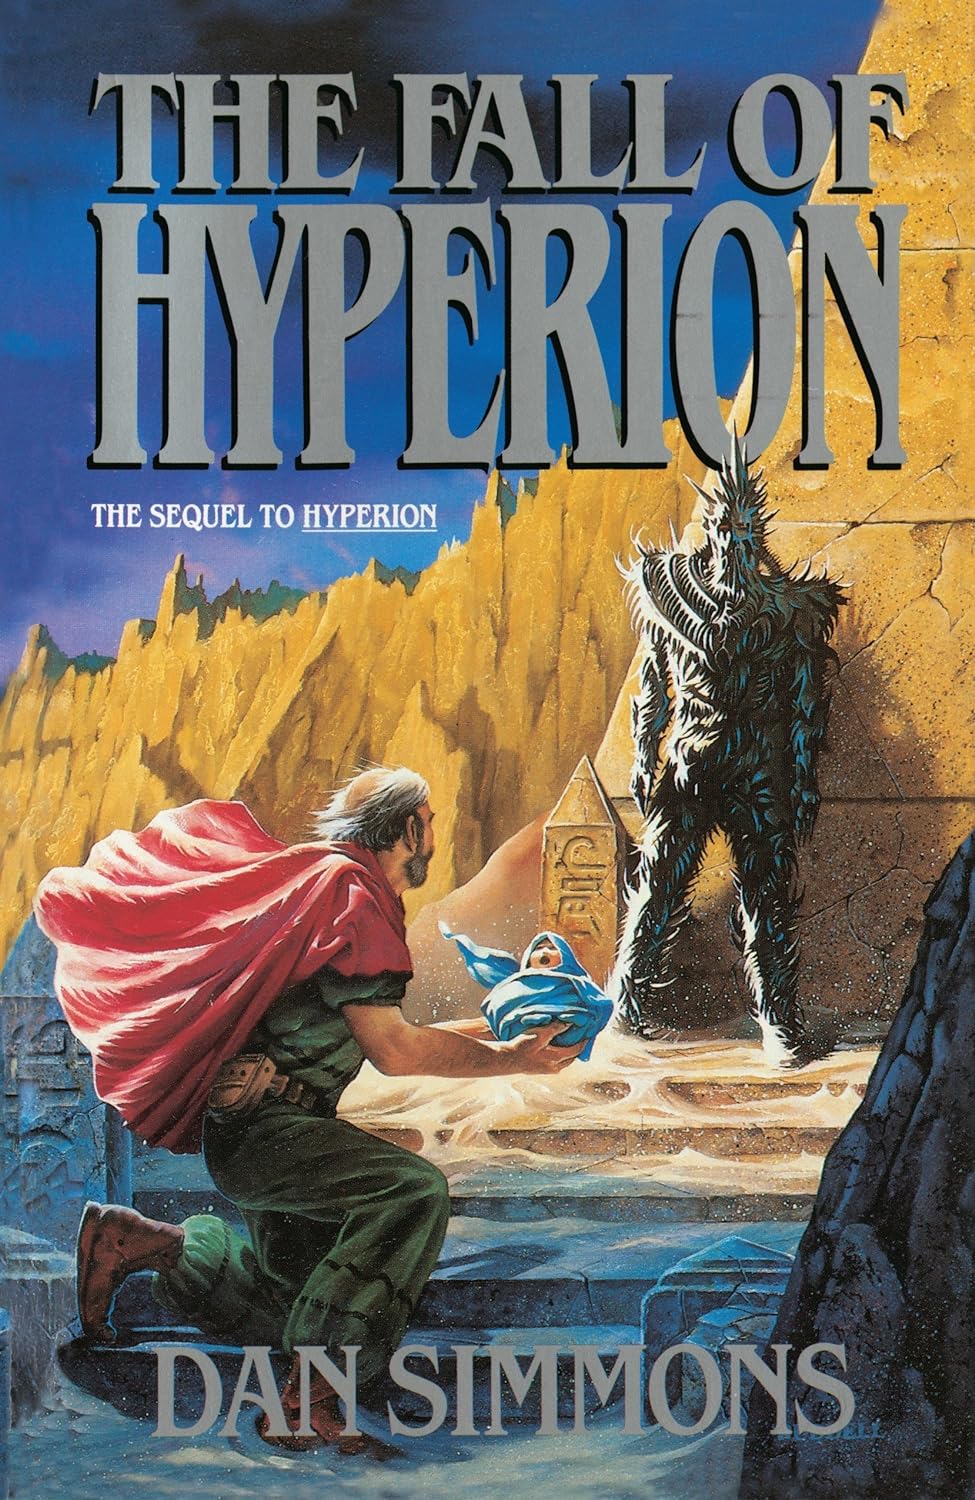 Book cover of The Fall of Hyperion.